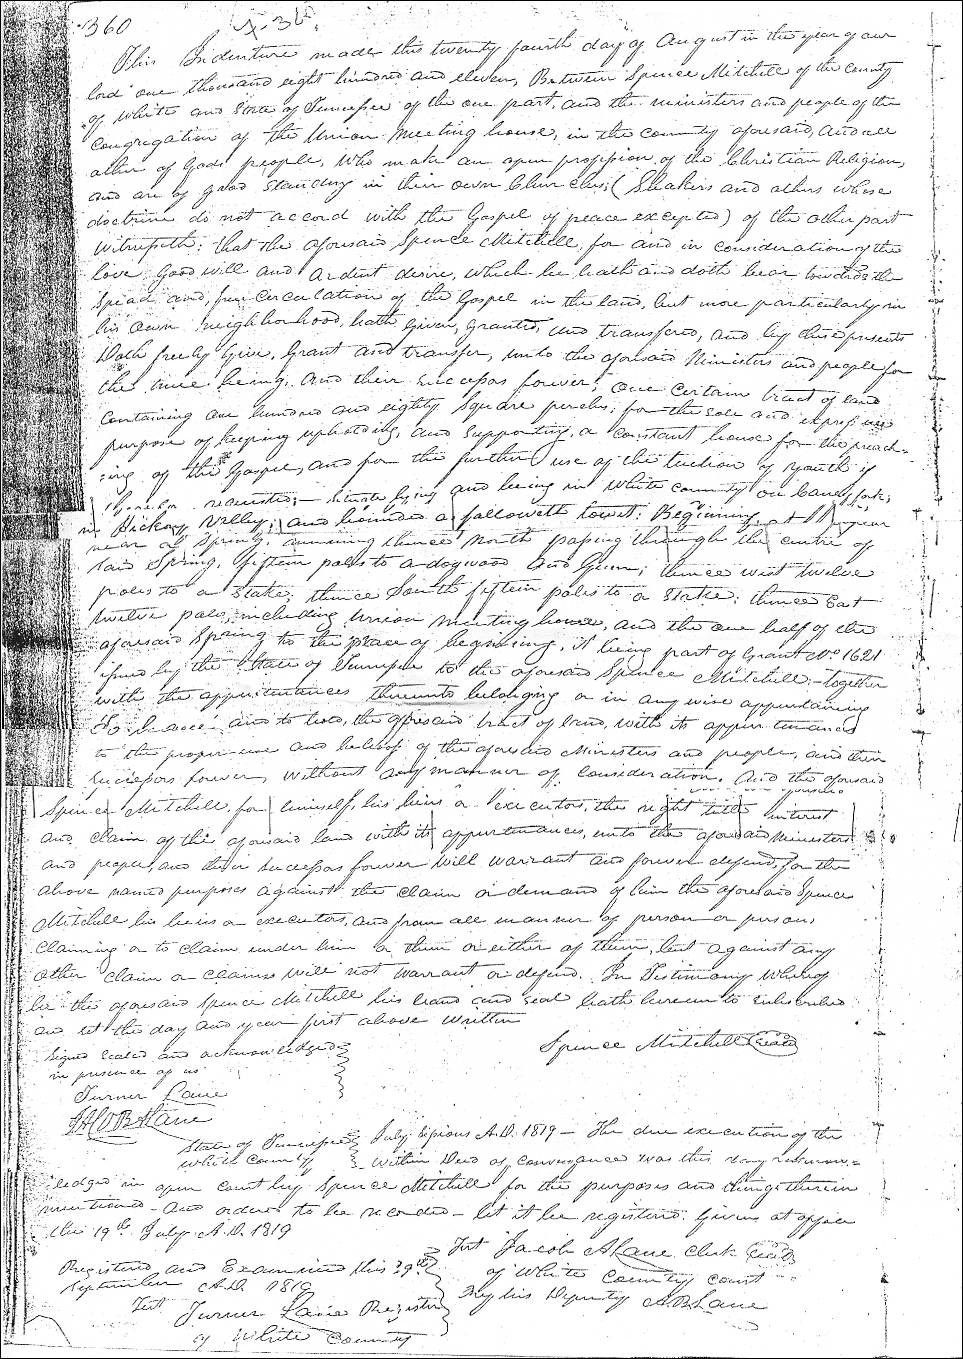 1811 Land Deed from Spence Mitchell to Union Meeting House